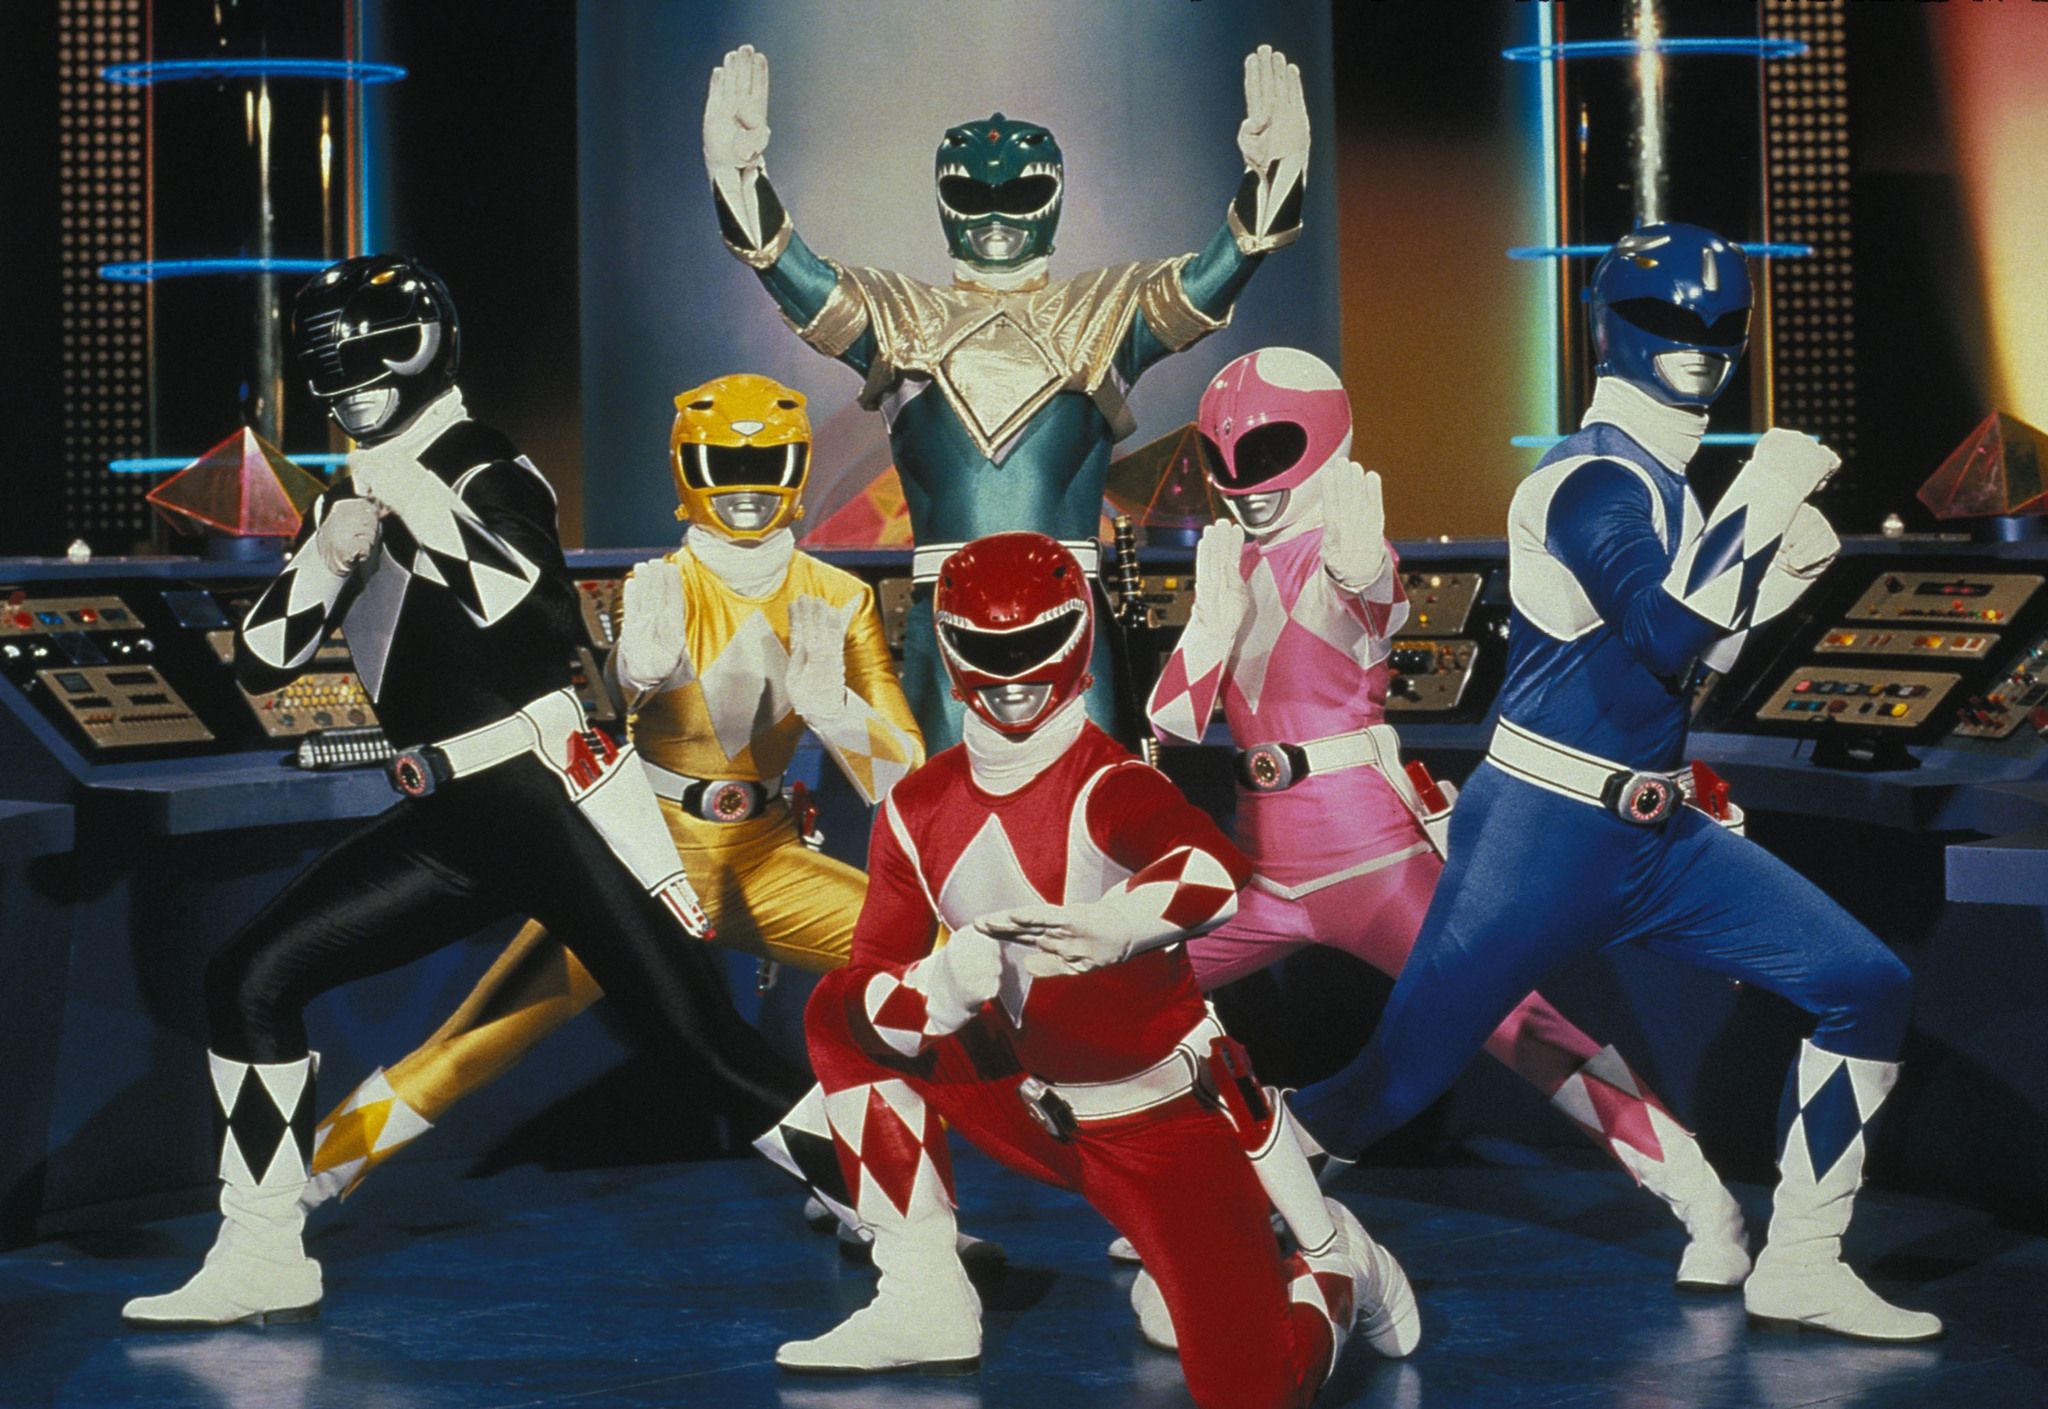 What Happened To The Original Mighty Morphin Power Rangers Cast